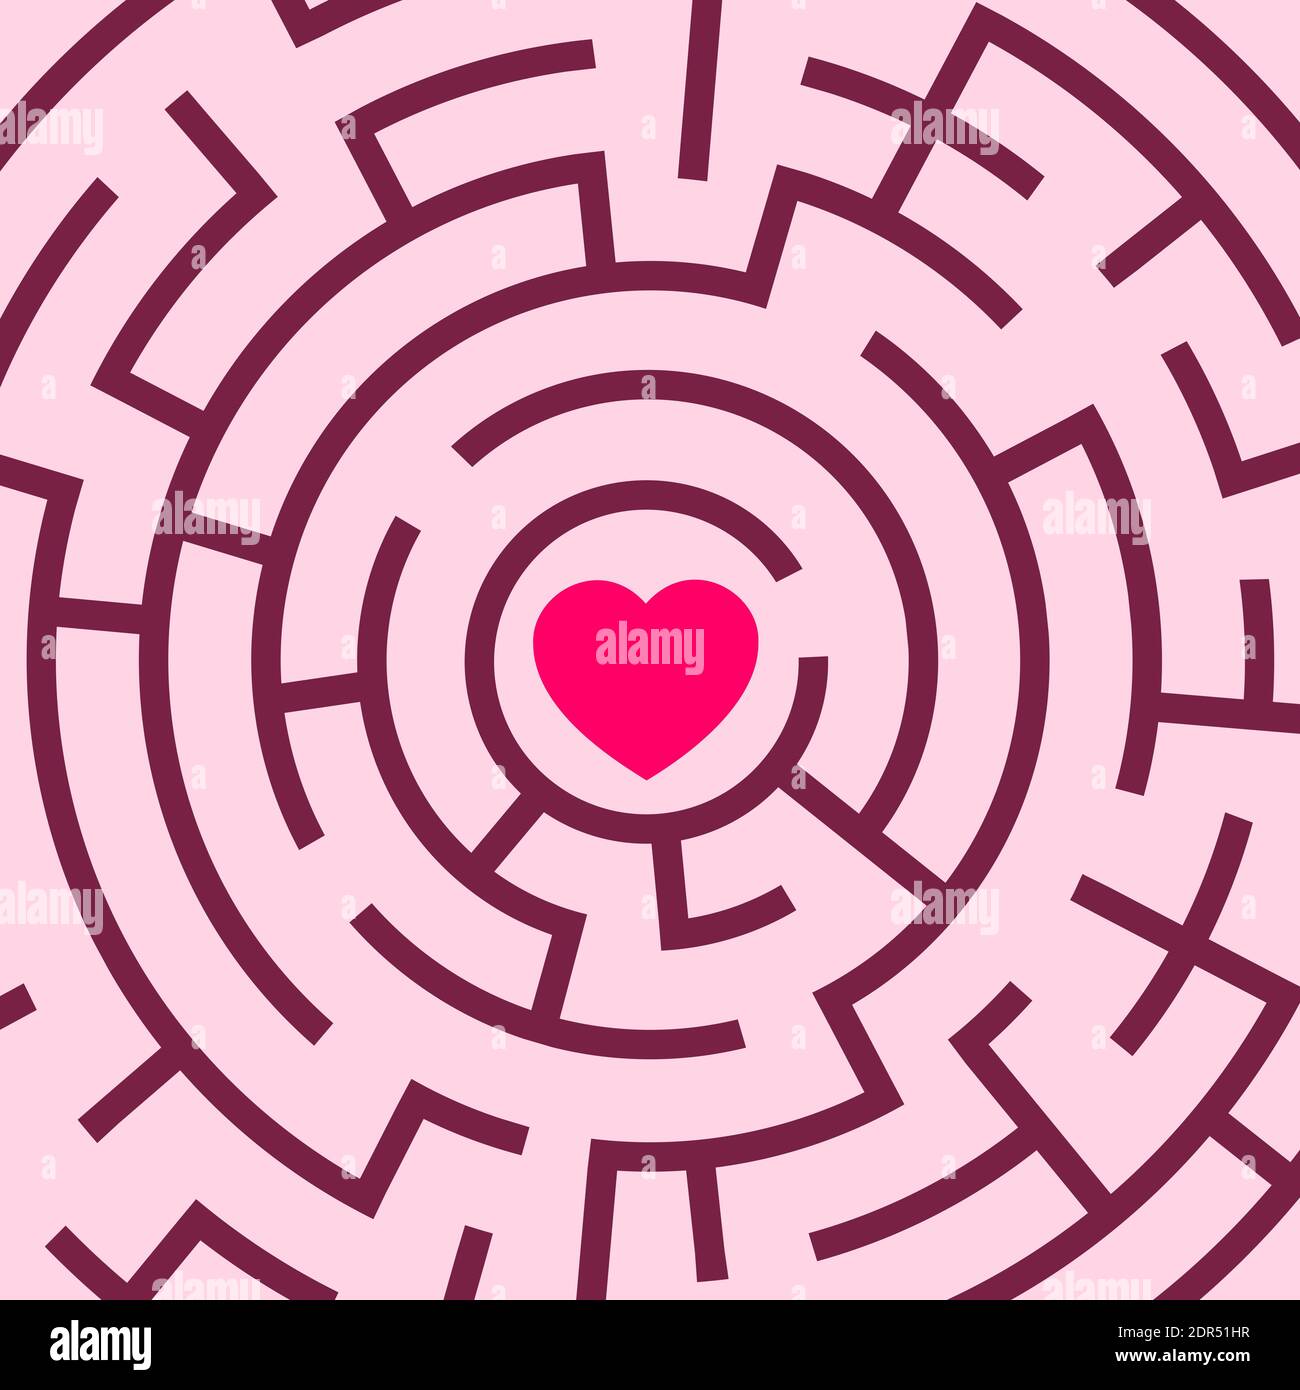 Romantic love heart in the center of the labyrinth - difficulty, problem and troble to find love, romance and amorous affection. Vector illustration Stock Photo